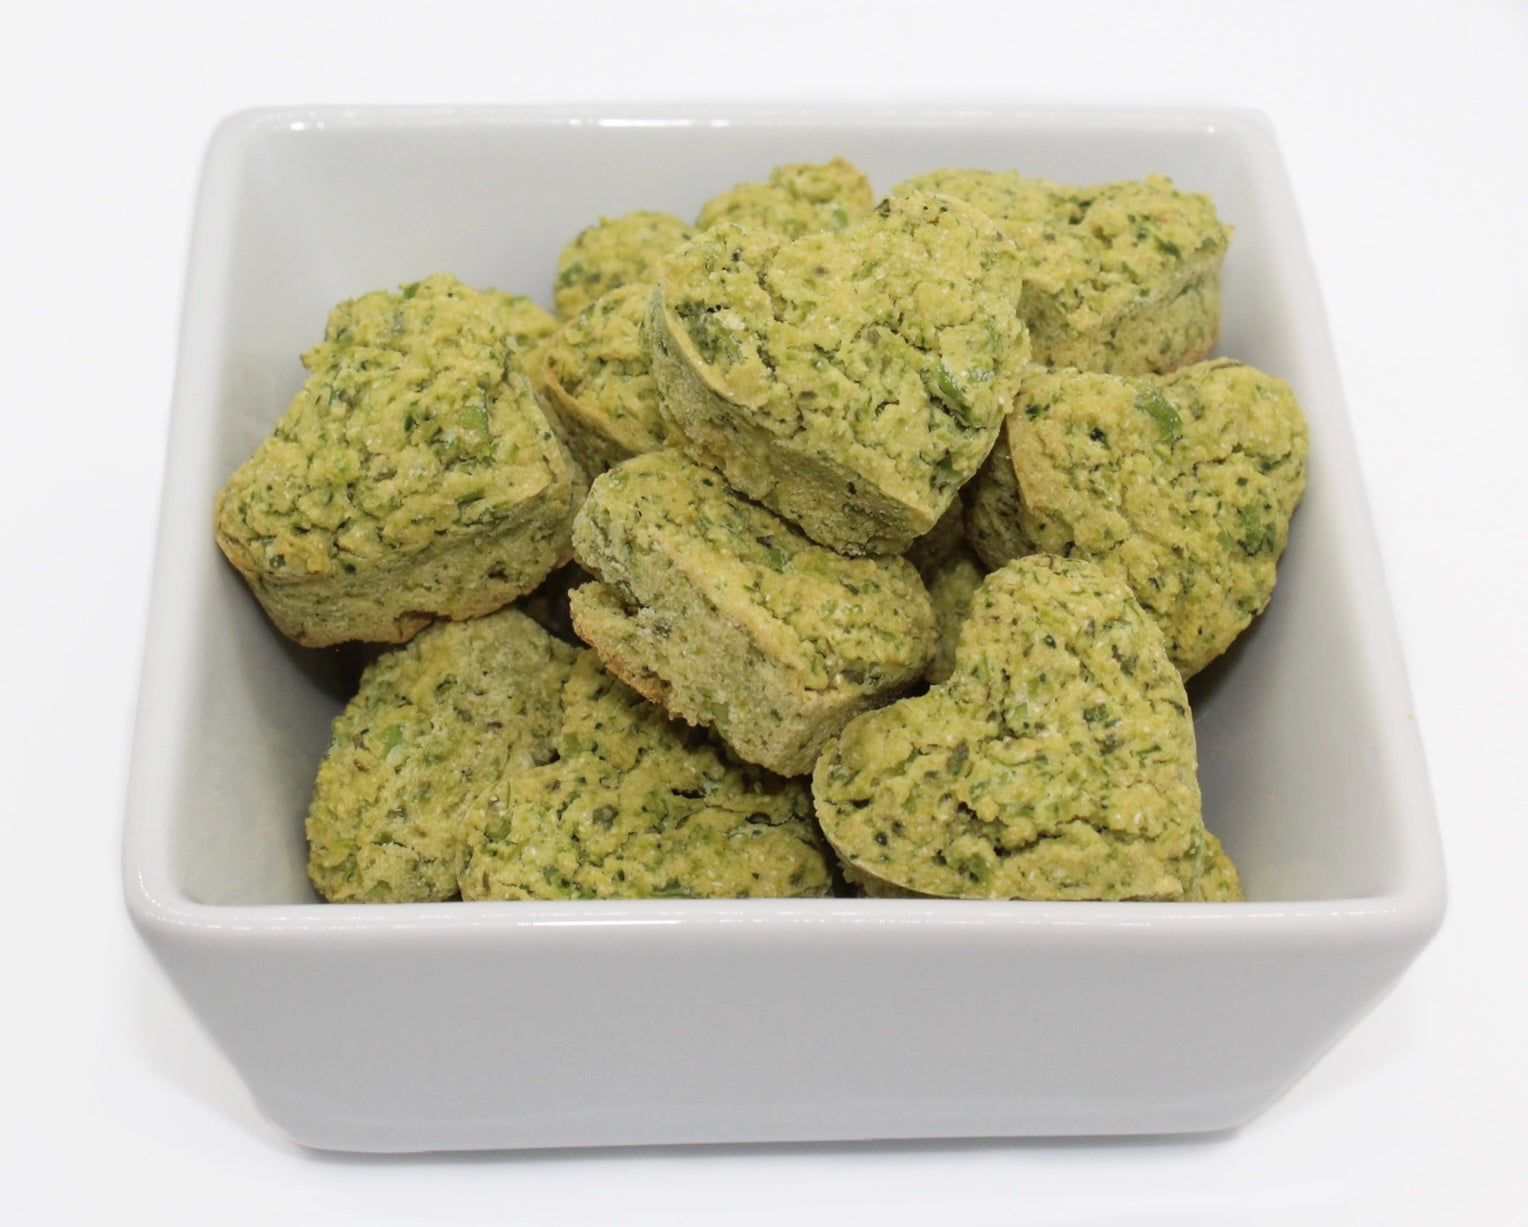 A bunch of green heart-shaped dog training treats in a white bowl. The treats are Broccoli and Peas flavor, parsley and cilantro can be seen in the treats. 